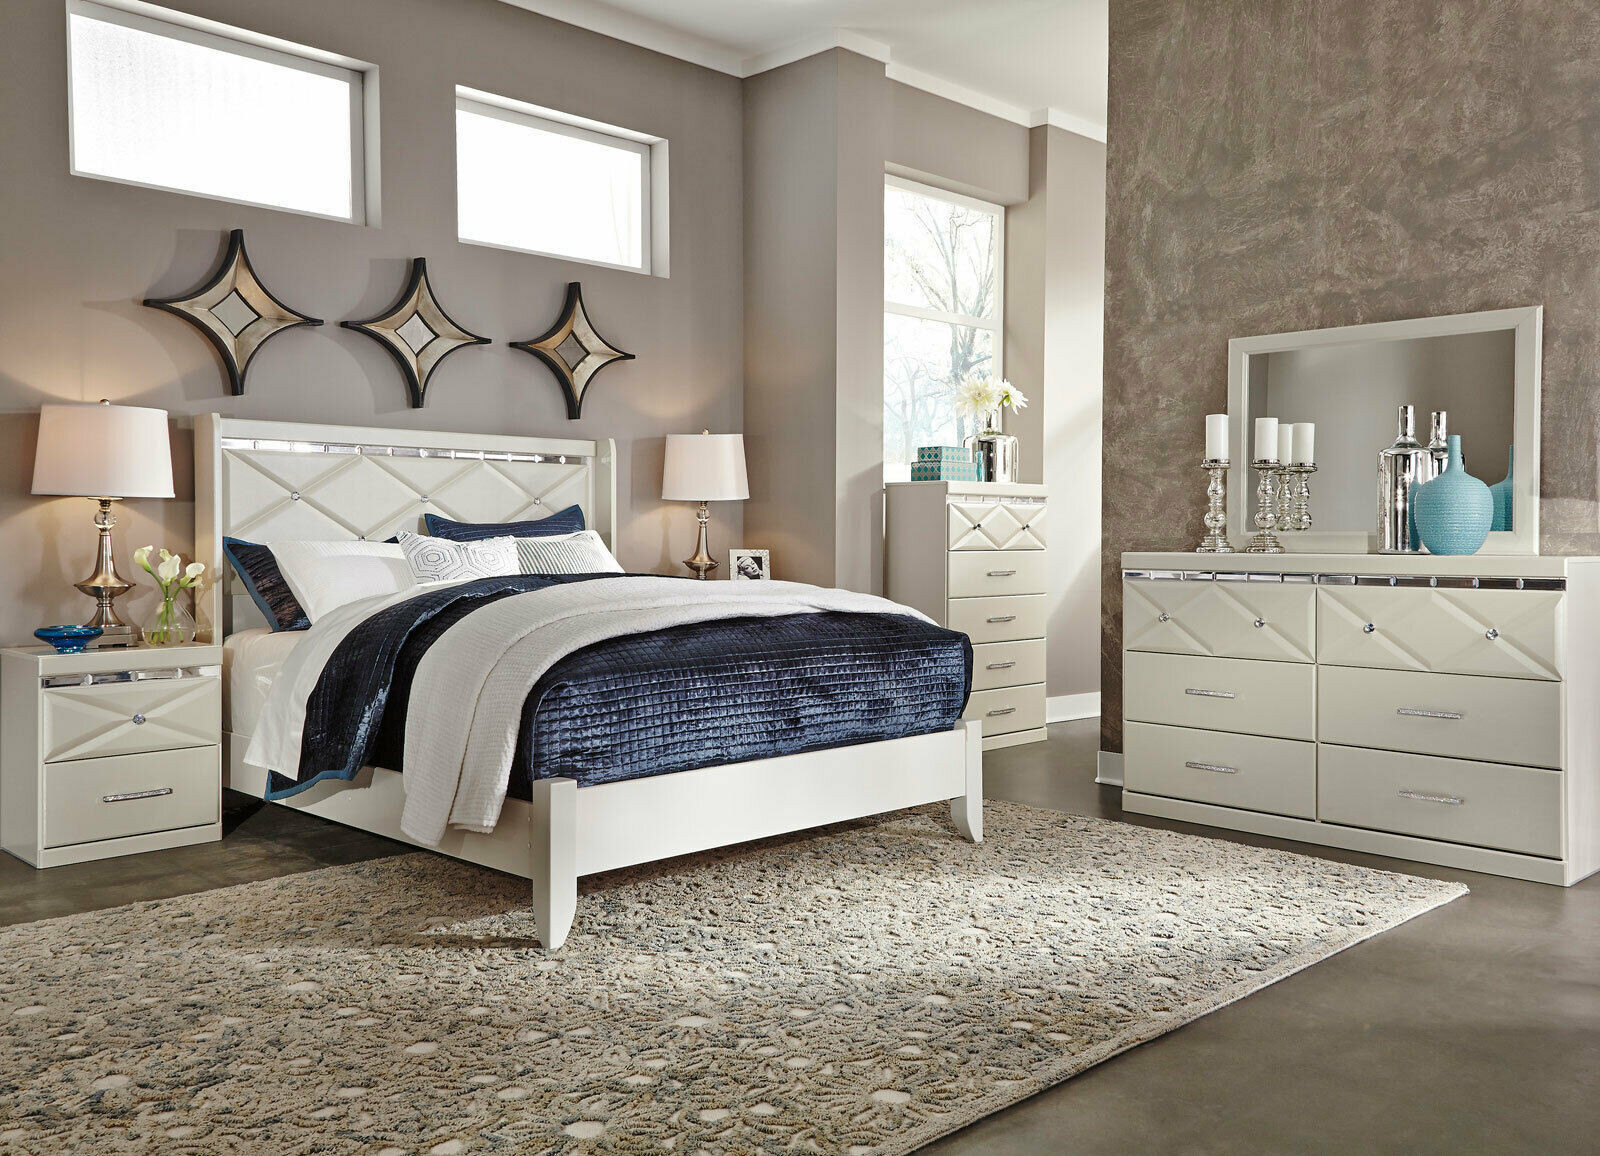 Modern White Bedroom Set
 MYRA 5 pieces Modern White Bedroom Set with King Bed